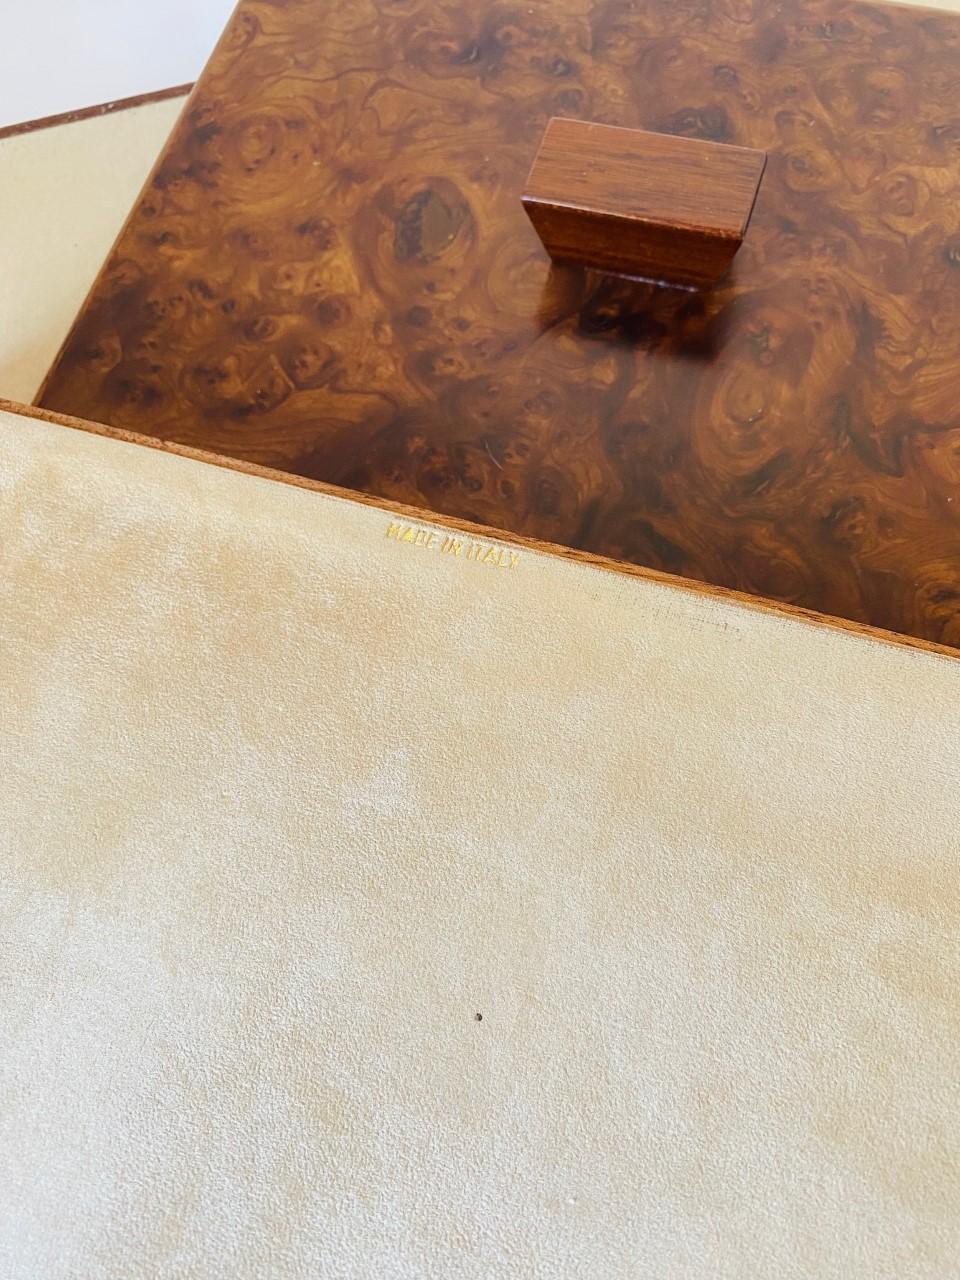 Suede Vintage Italian Burl Wood Desk Pad and Lidded Paper Tray, 1970s